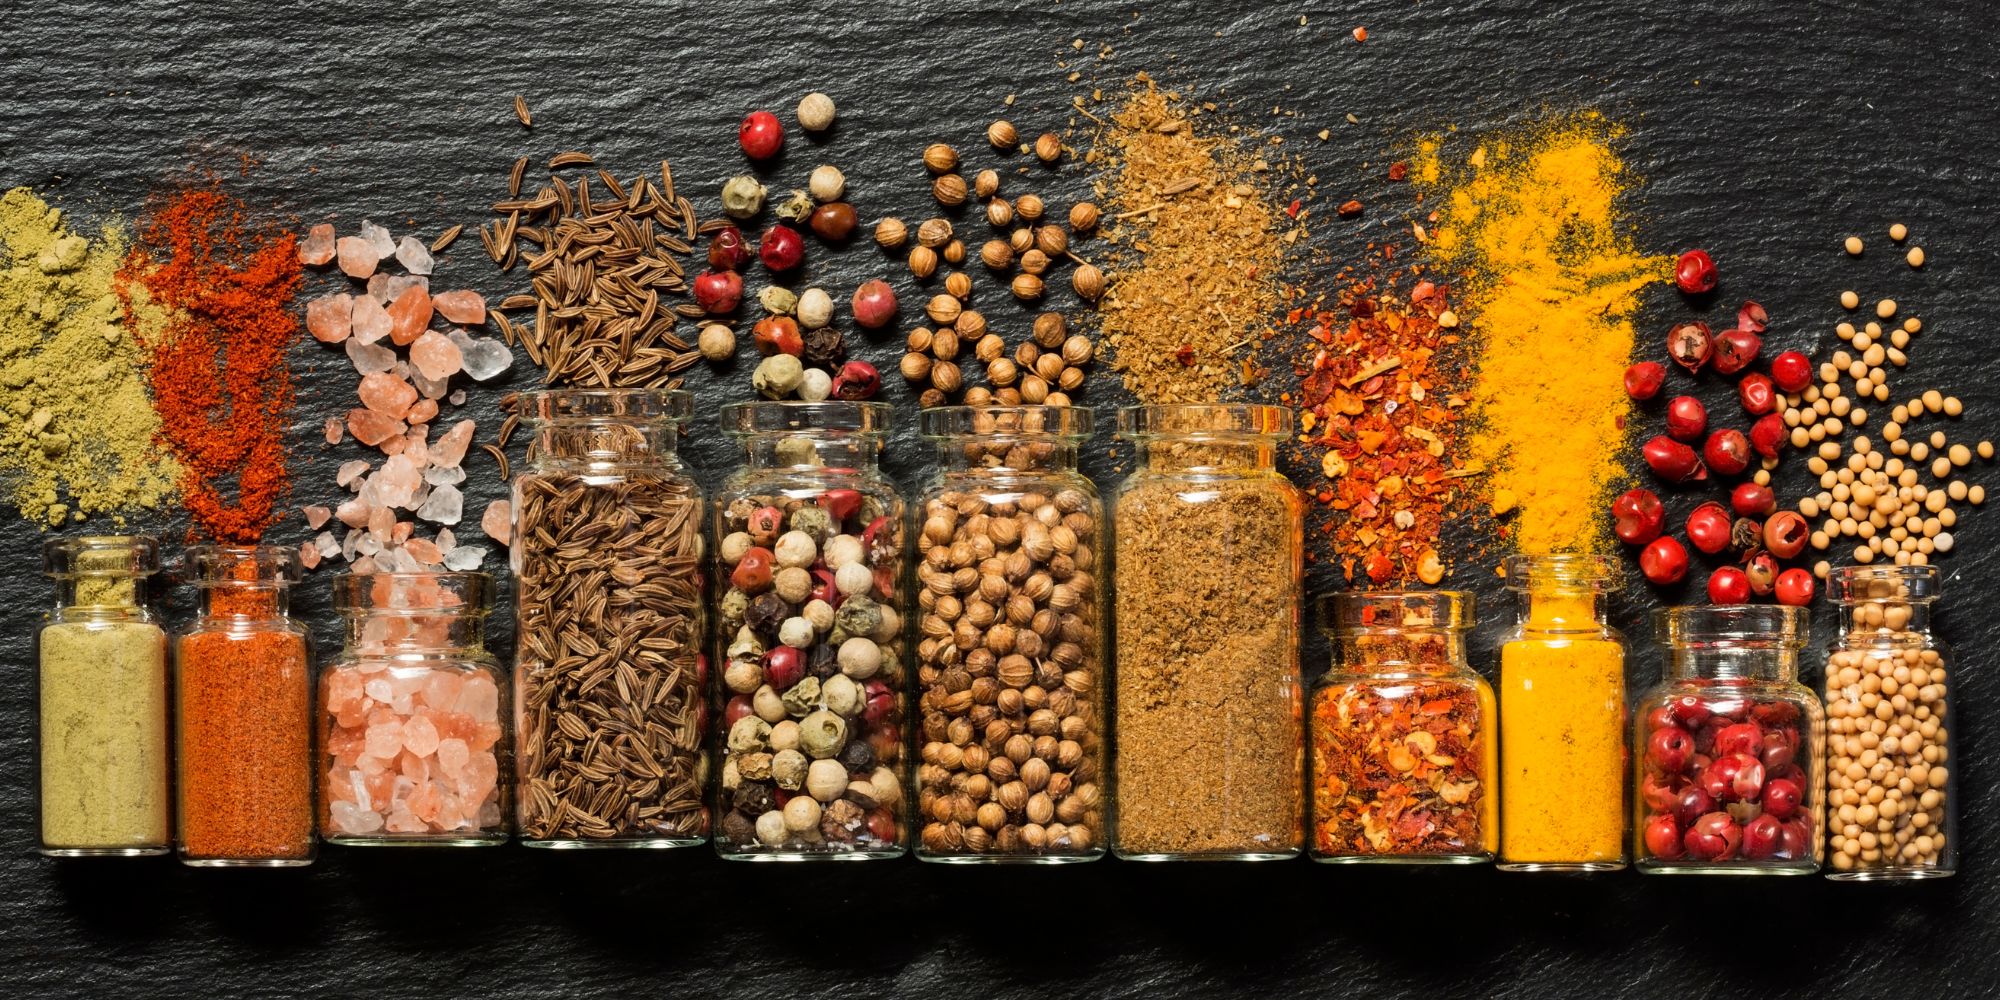 Spice Up Your Health - The Healthiest Seasonings and Their Benefits